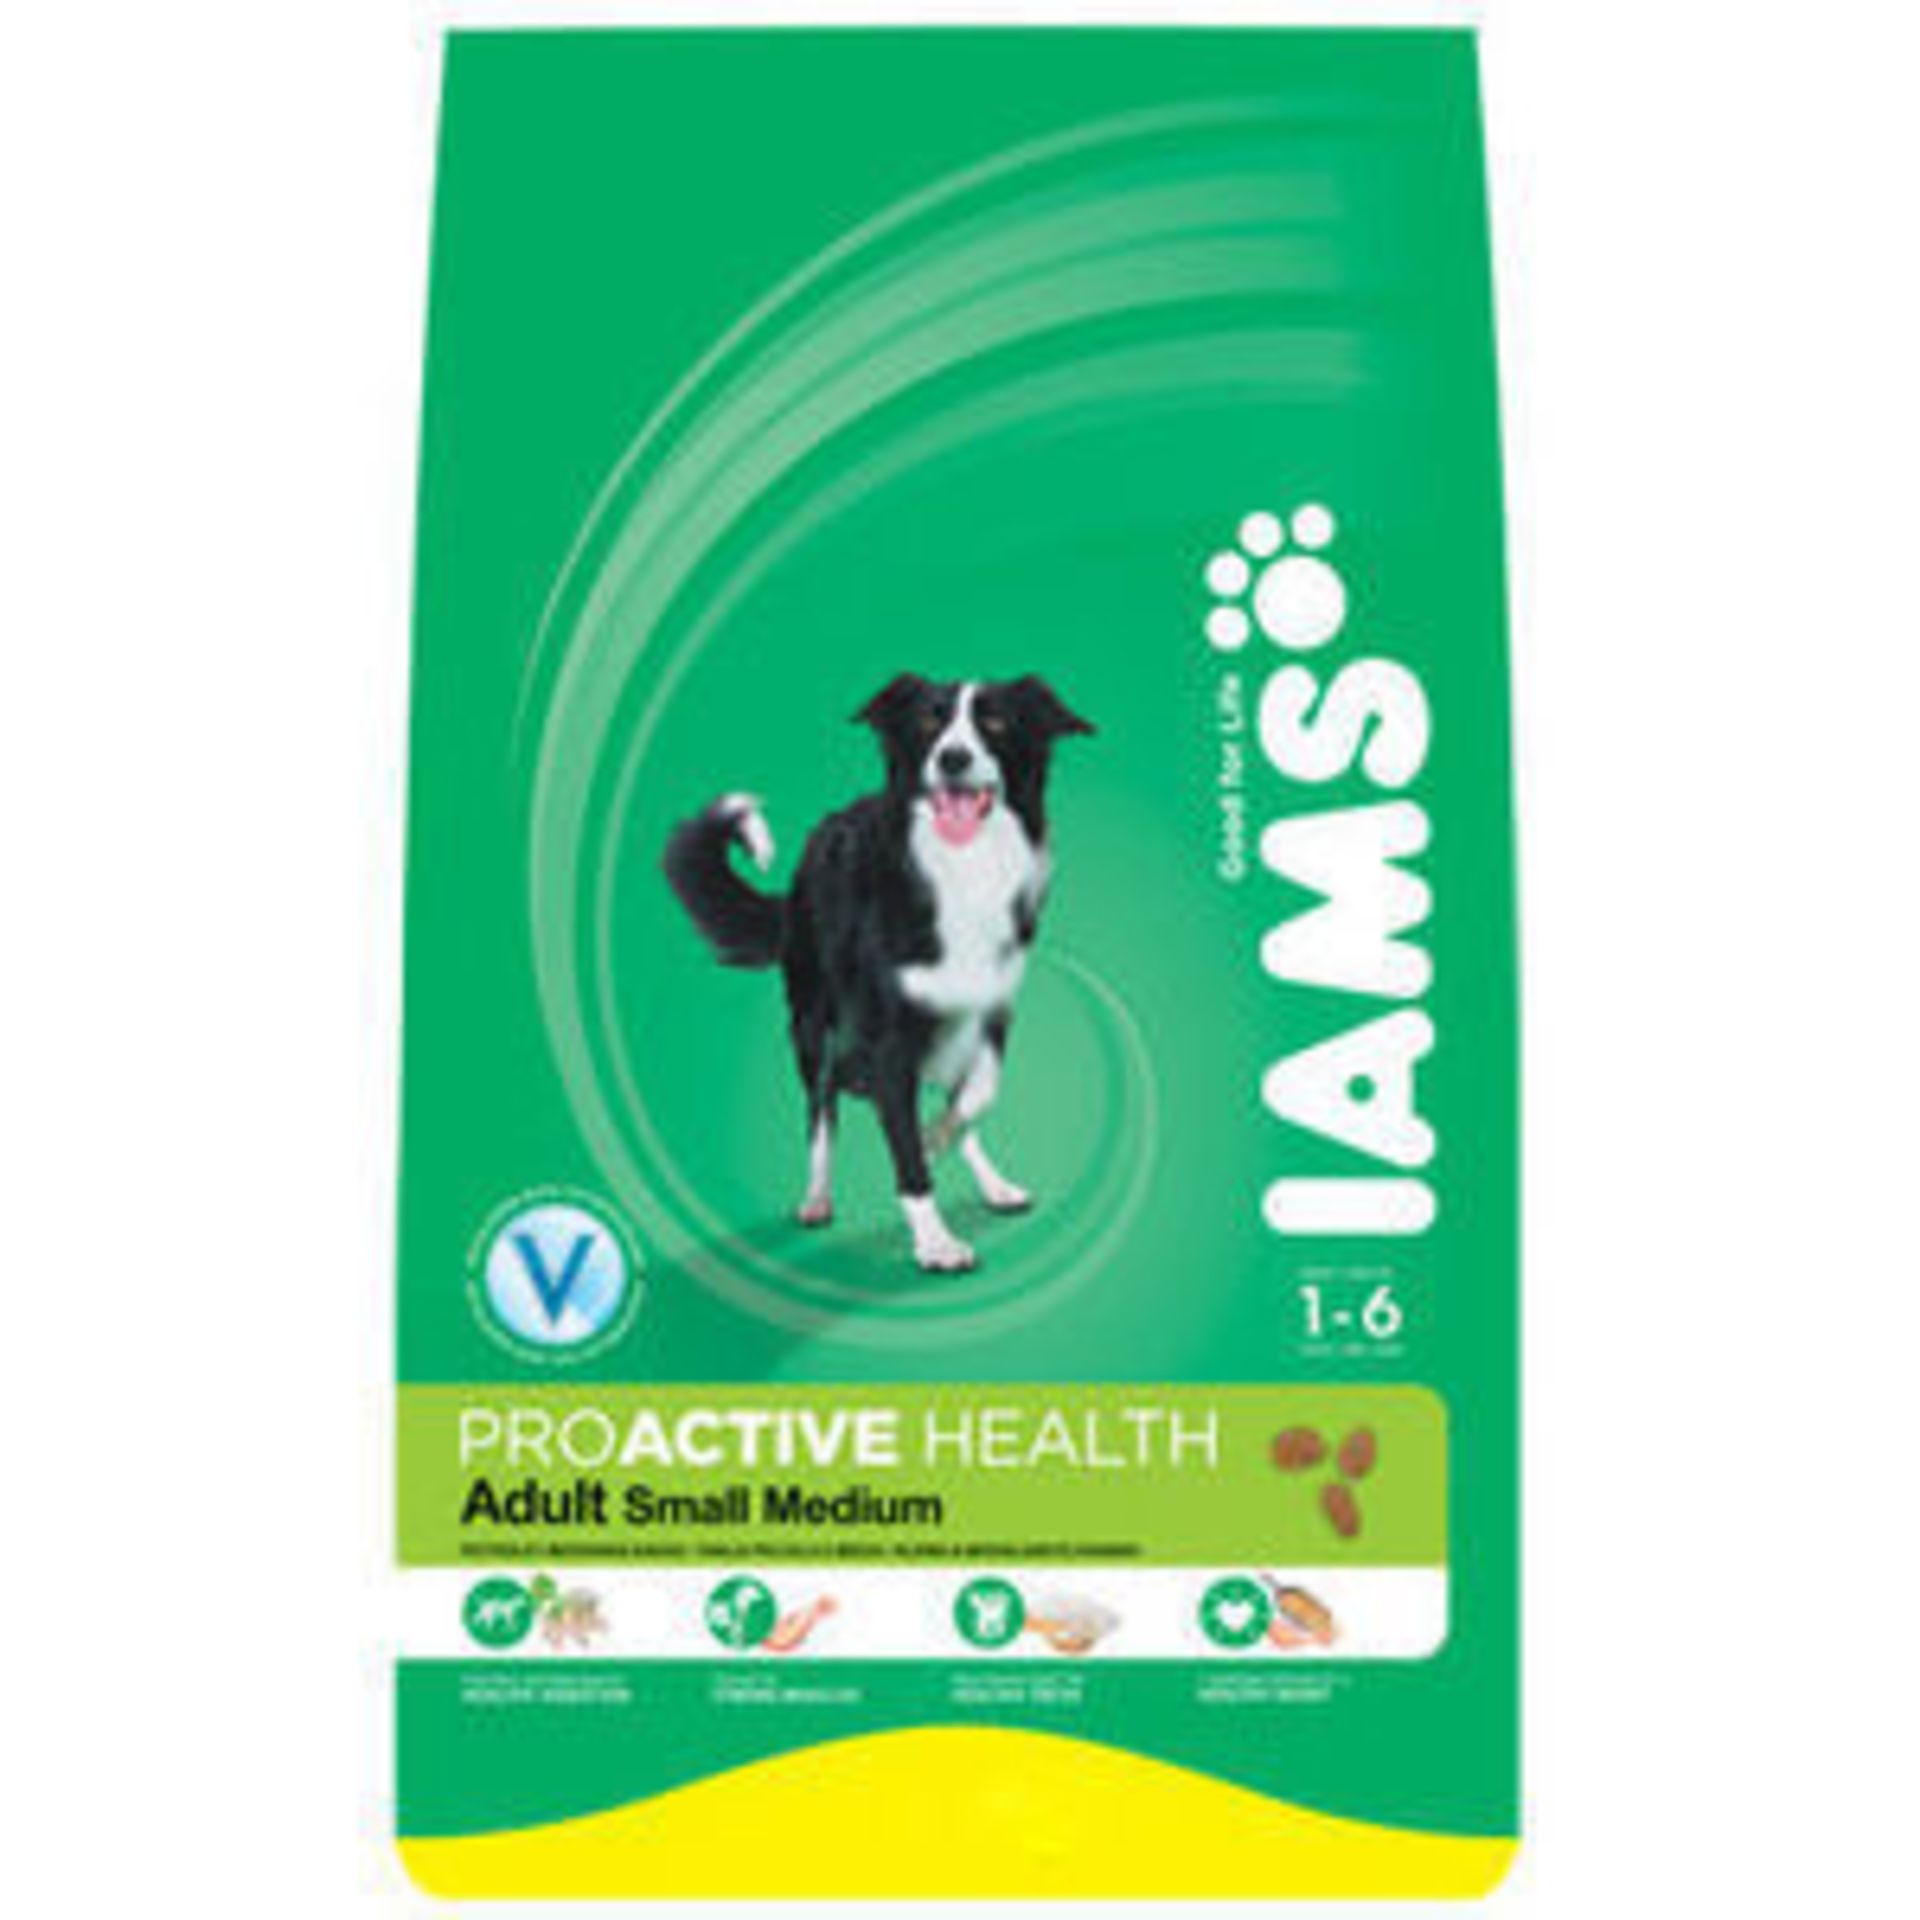 V Grade A 10kg bag of Iams Proactive Health Dog Food for Small & Medium Adult Dogs age 1-6 years